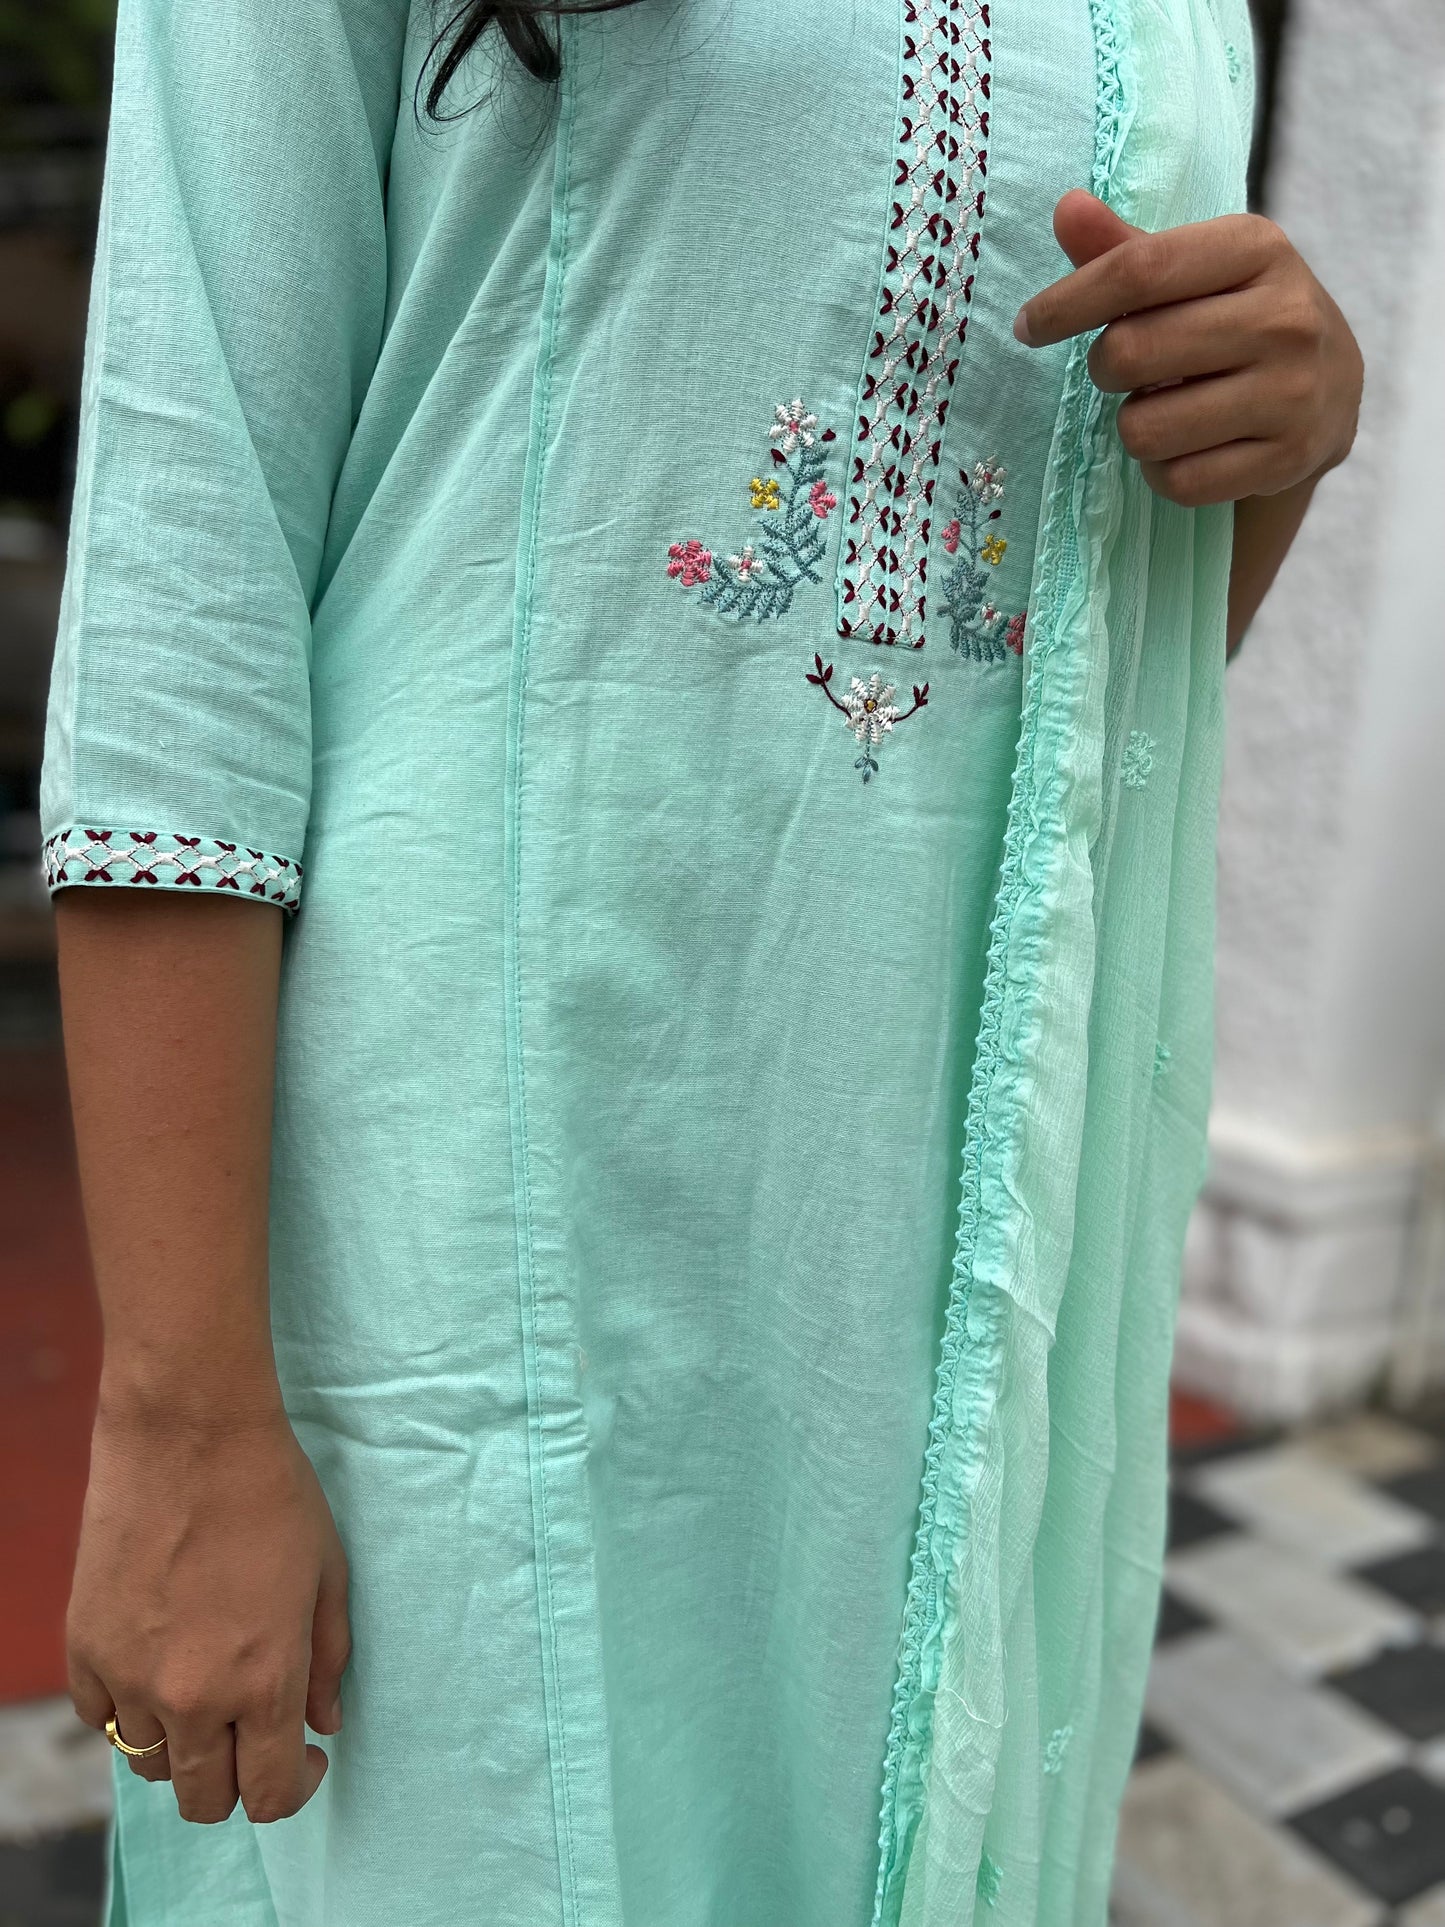 Southloom Stitched Cotton Salwar Set in Turquoise with Floral Thread Work Design